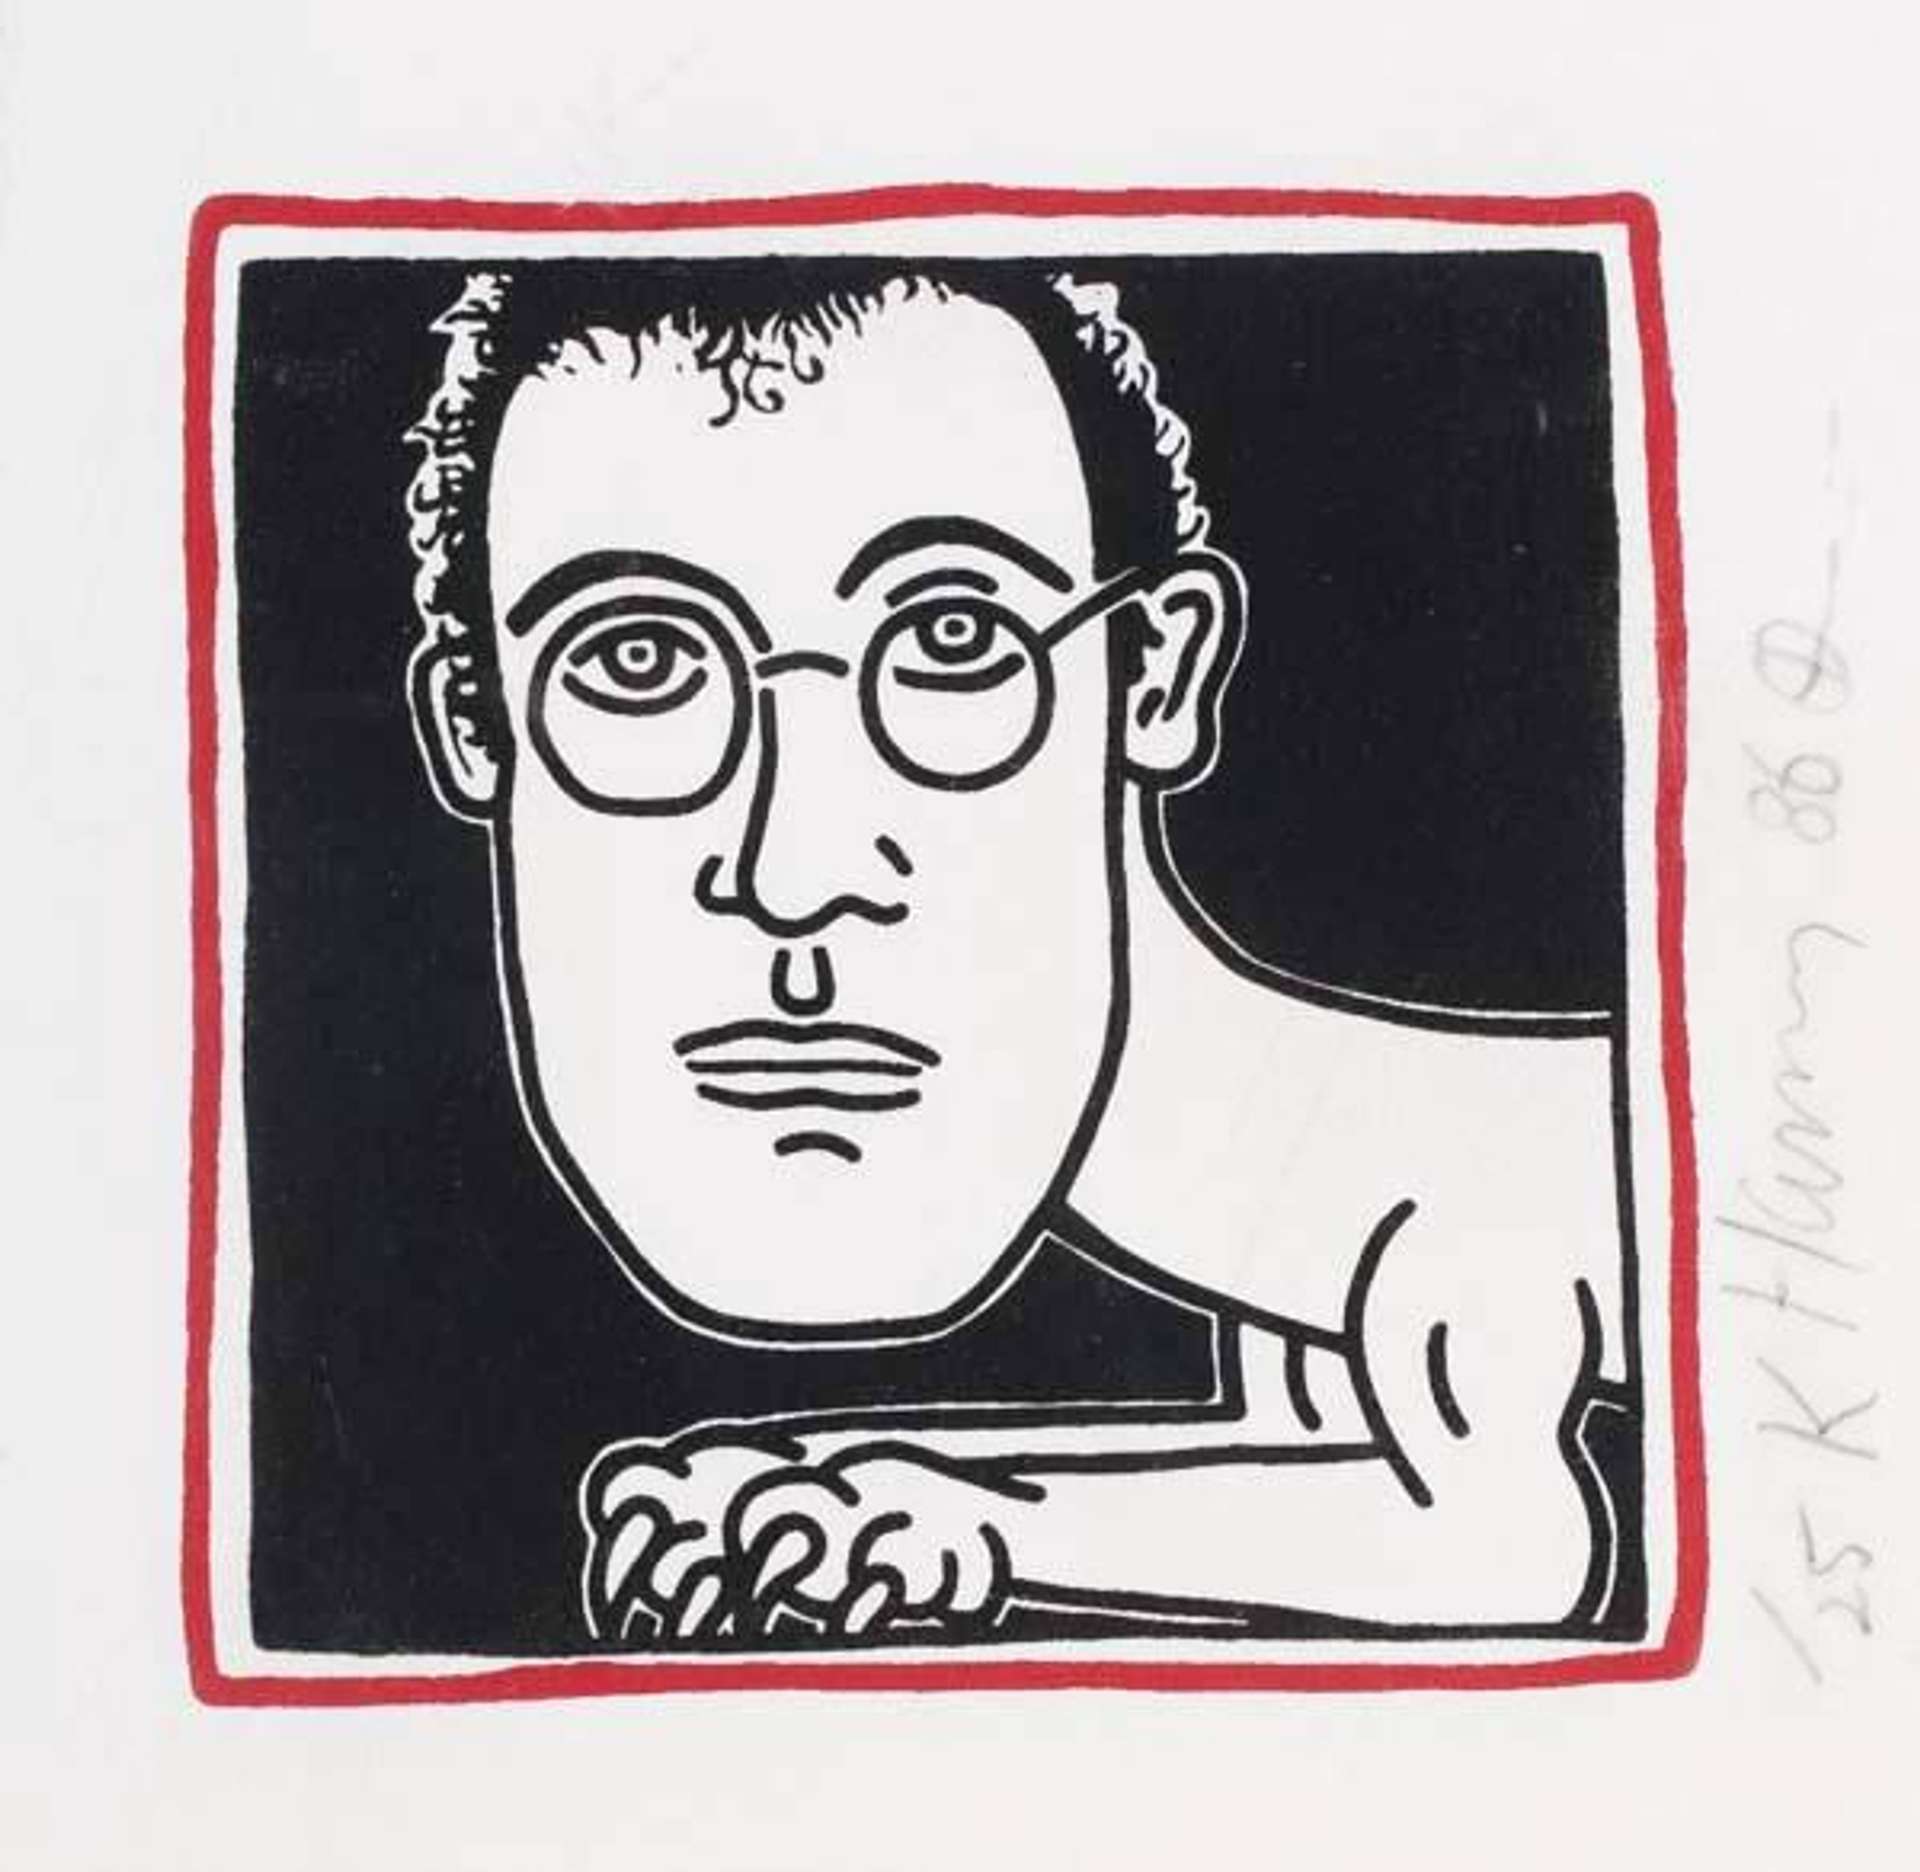 A screenprint by Keith Haring depicting the artist's self portrait in the form of a sphinx, set against a plain black backdrop, framed with a bright red, crayon-like line as the only use of colour in the image.